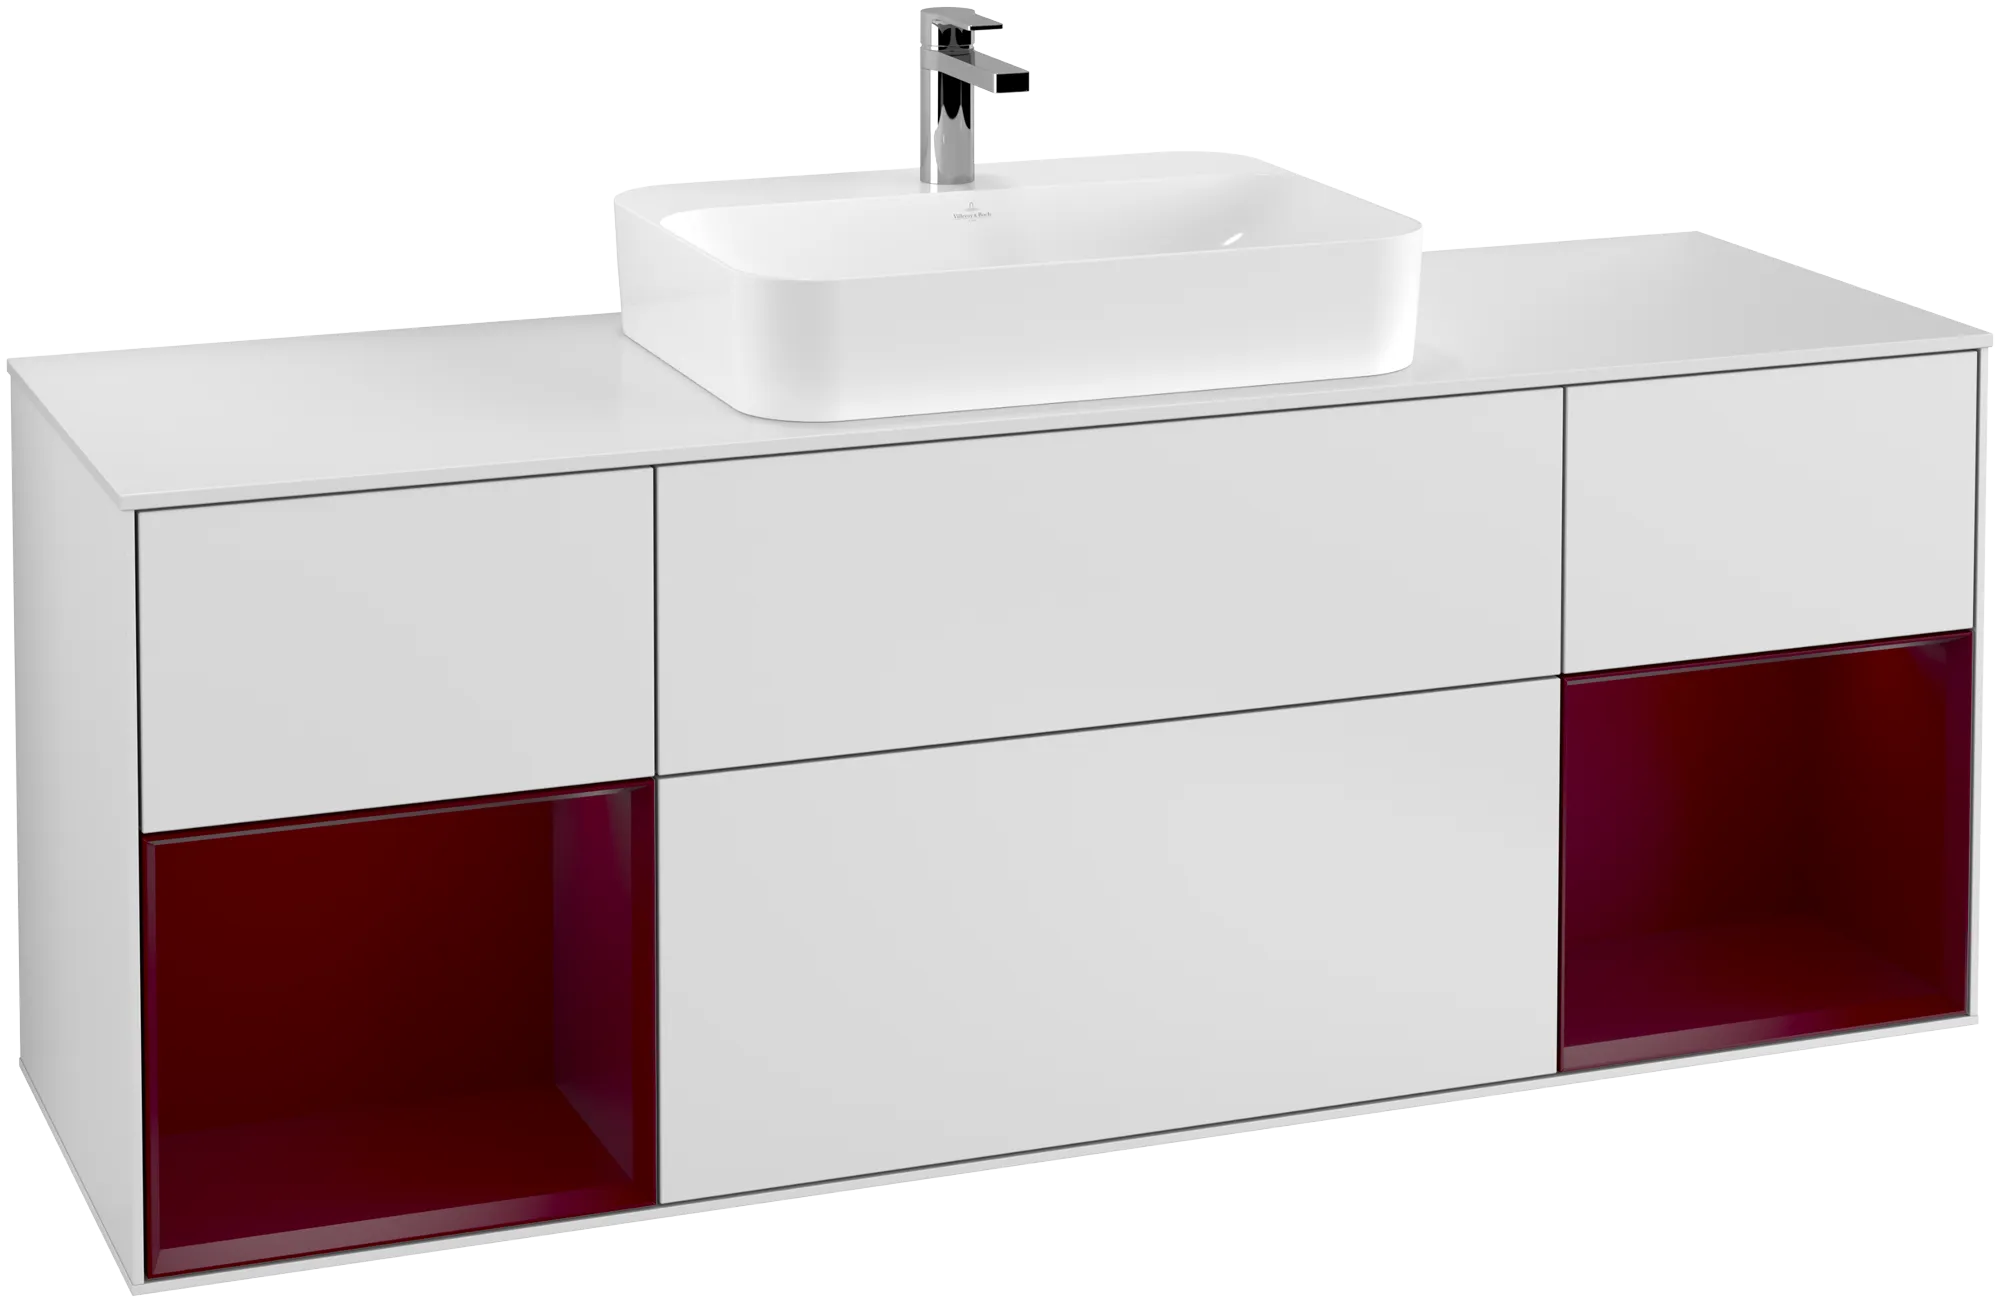 Picture of VILLEROY BOCH Finion Vanity unit, with lighting, 4 pull-out compartments, 1600 x 603 x 501 mm, White Matt Lacquer / Peony Matt Lacquer / Glass White Matt #G451HBMT